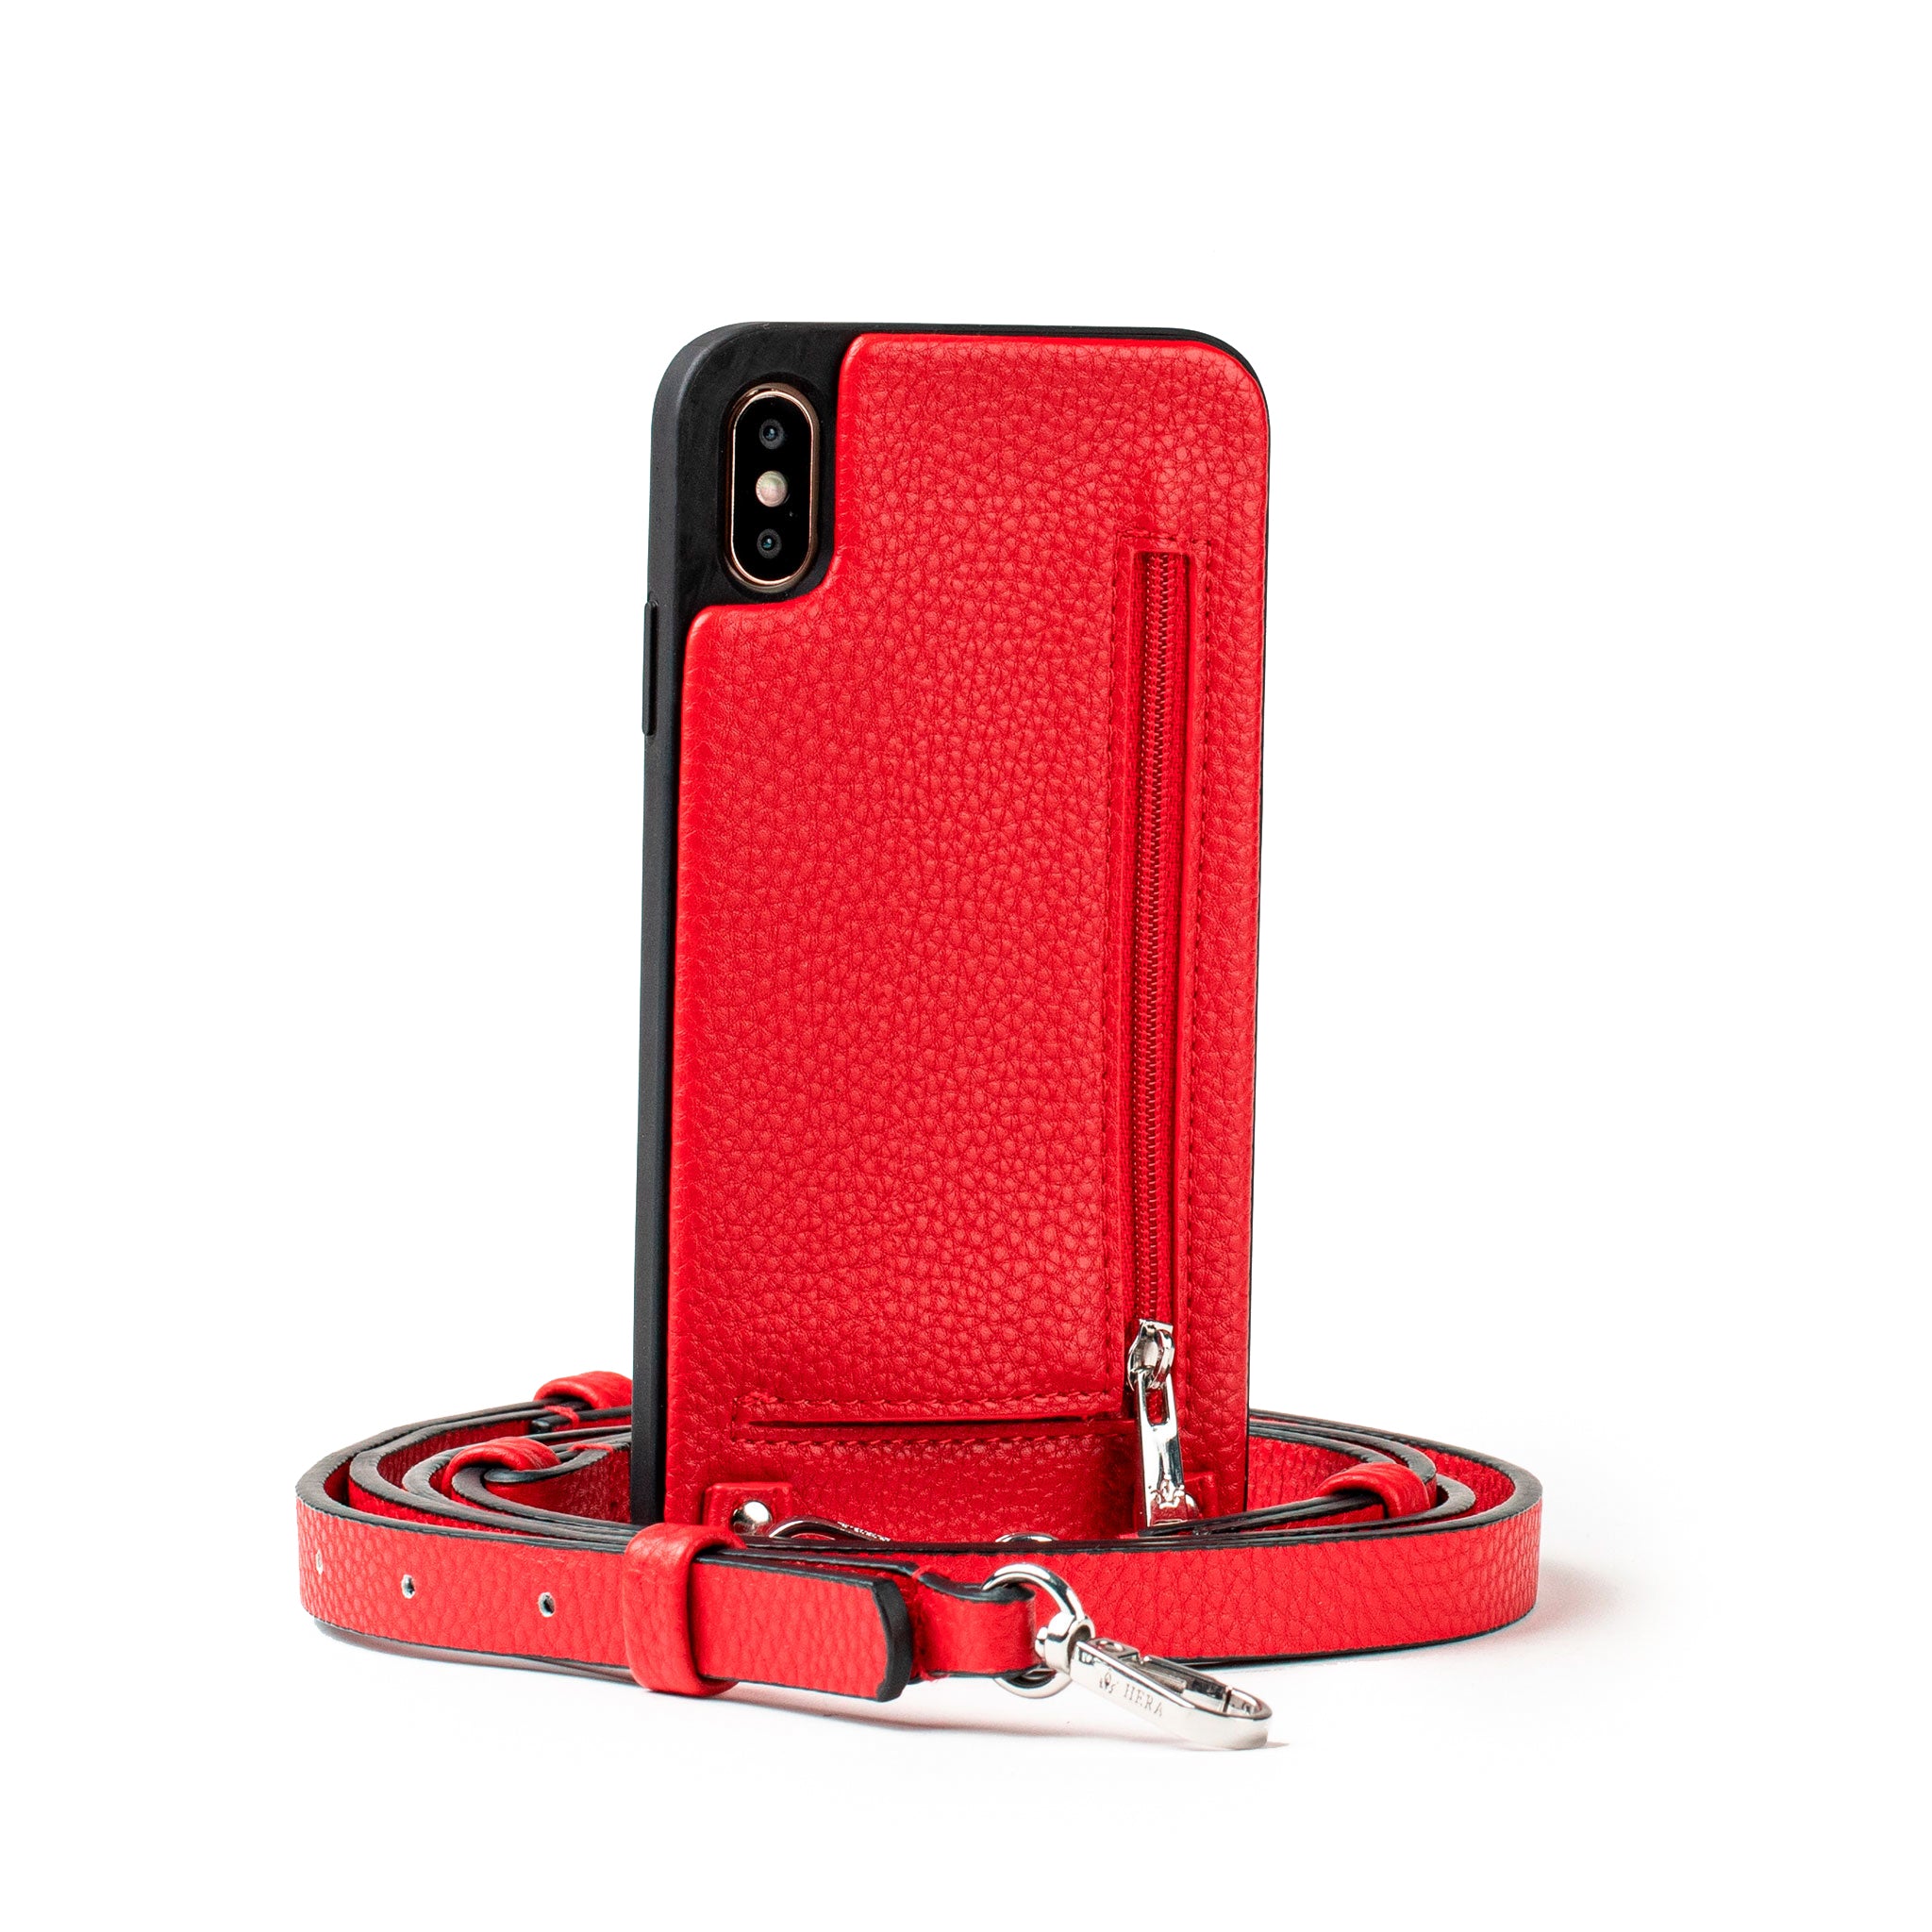 Hera Cases: Crossbody Phone Case & Strap - iPhone Xs Max - Red